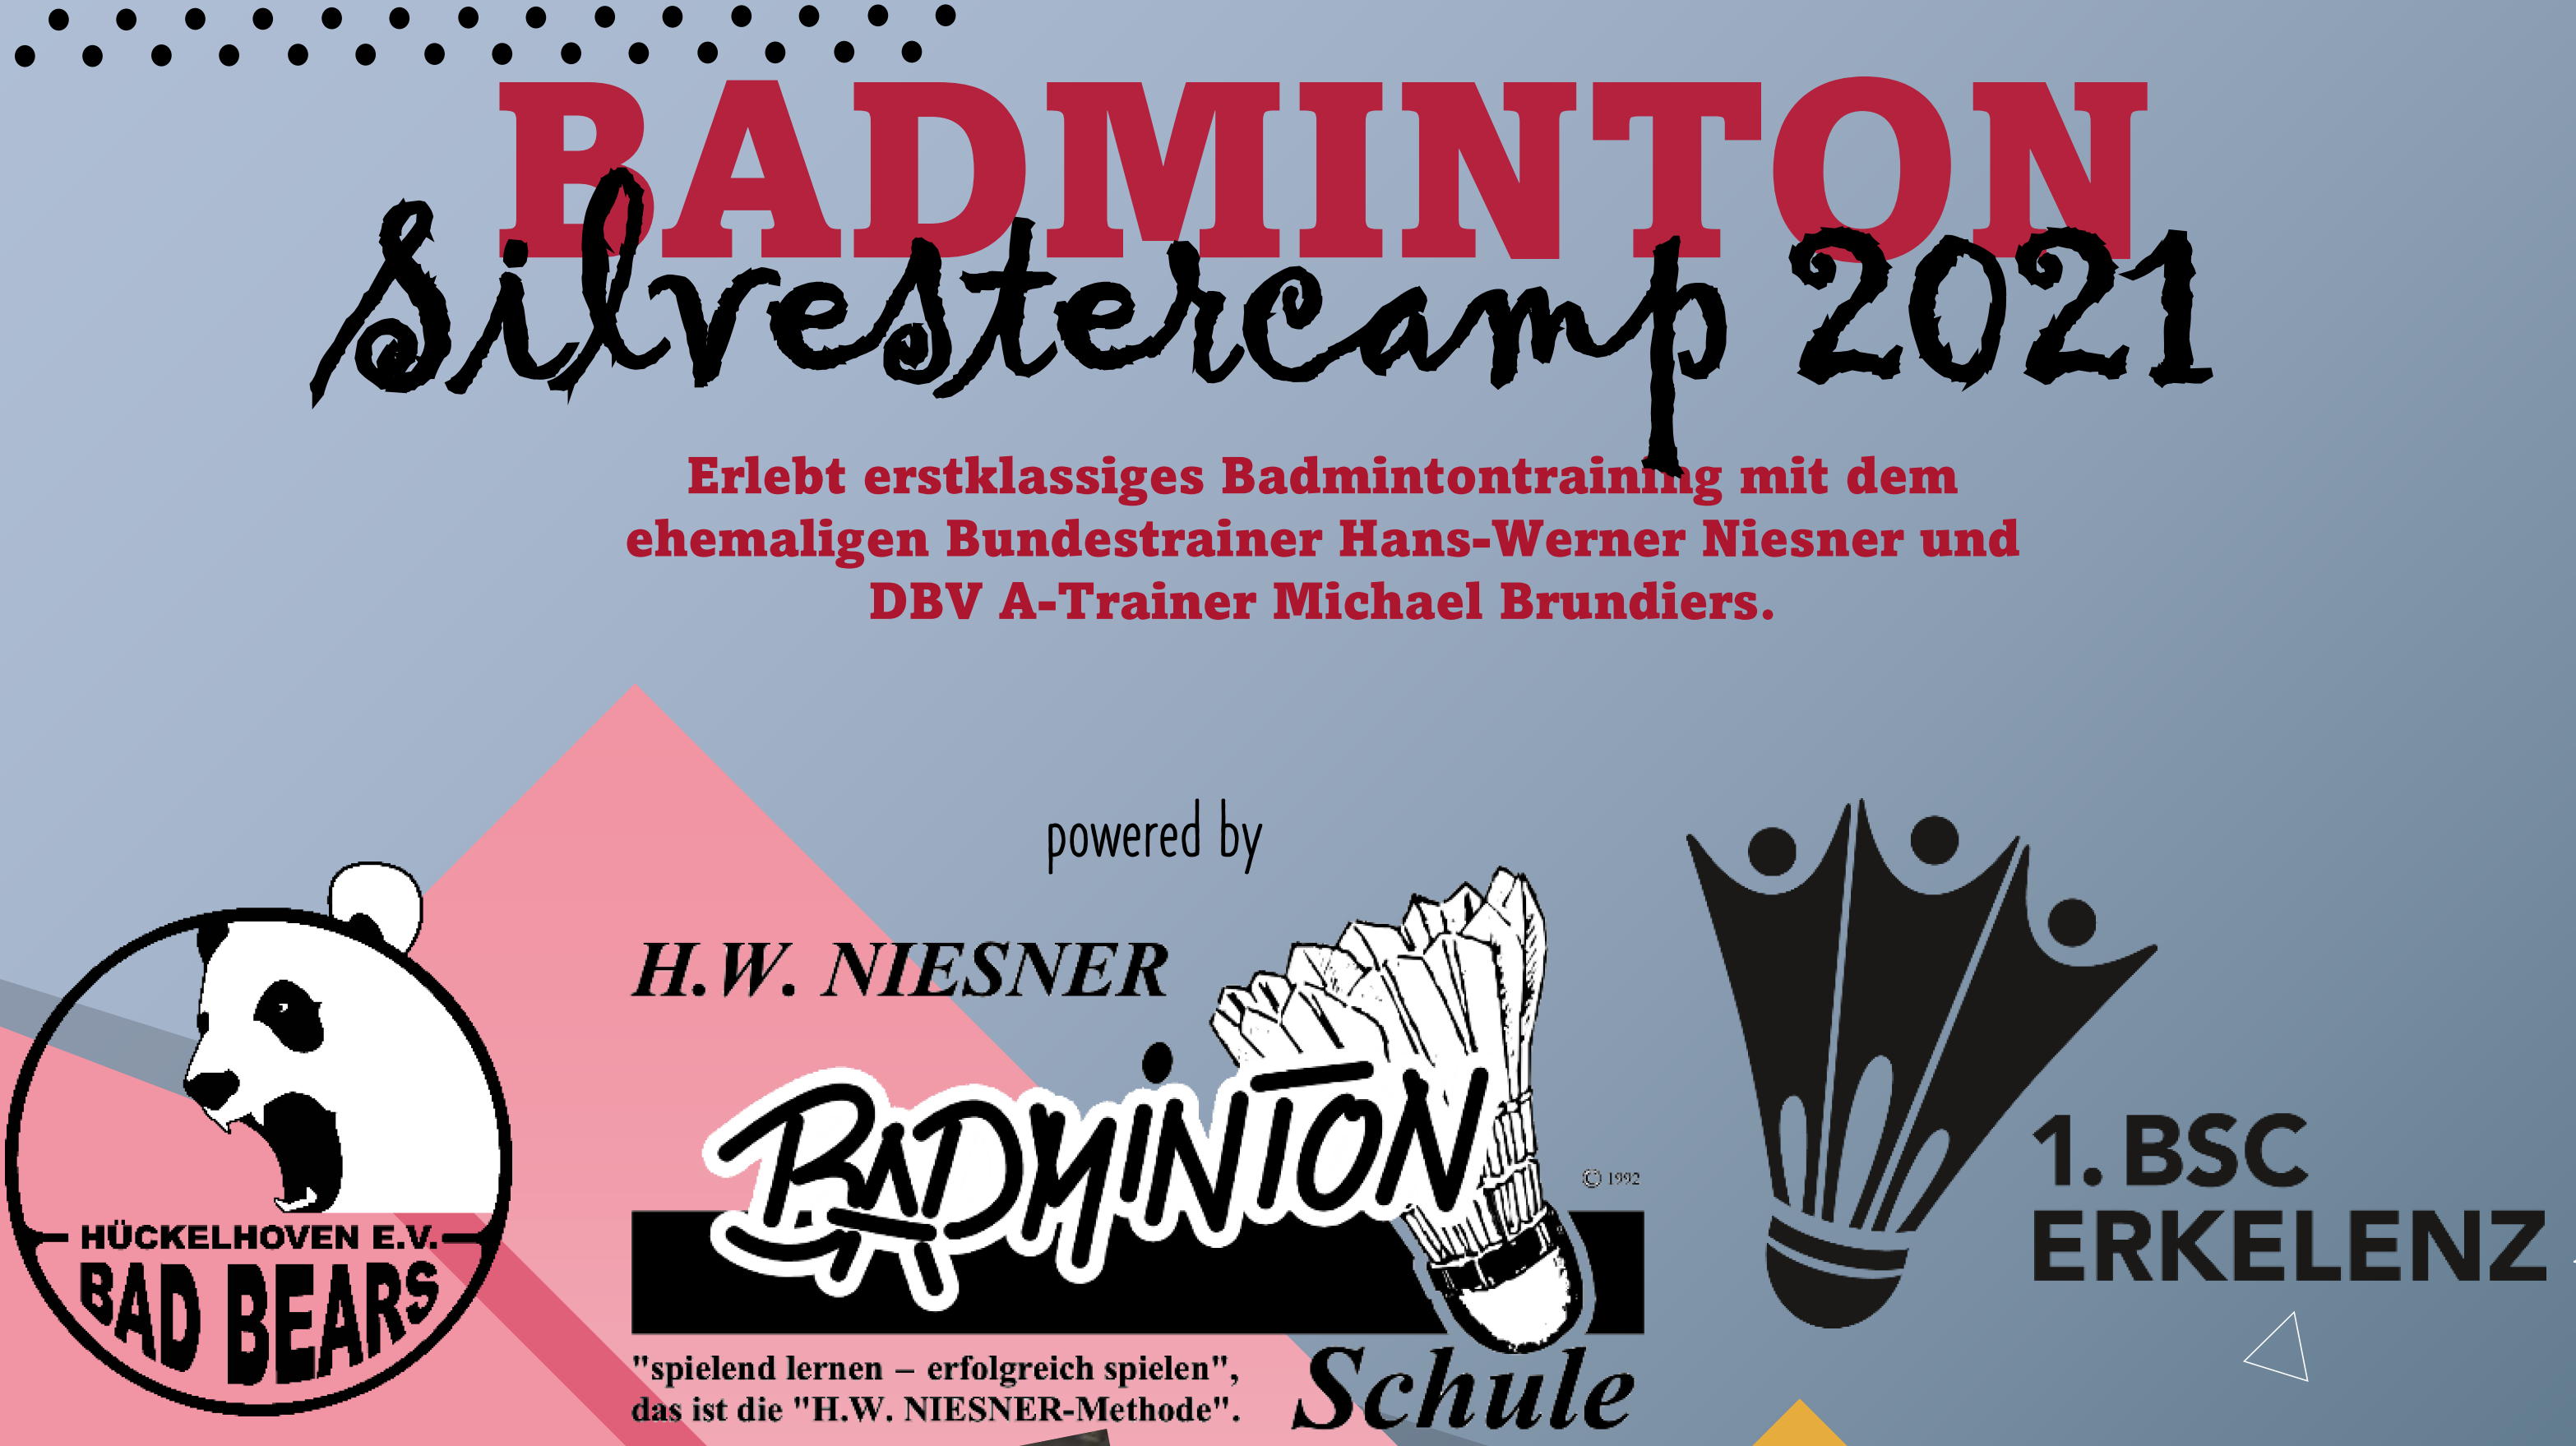 You are currently viewing Badminton Silvestercamp 2021